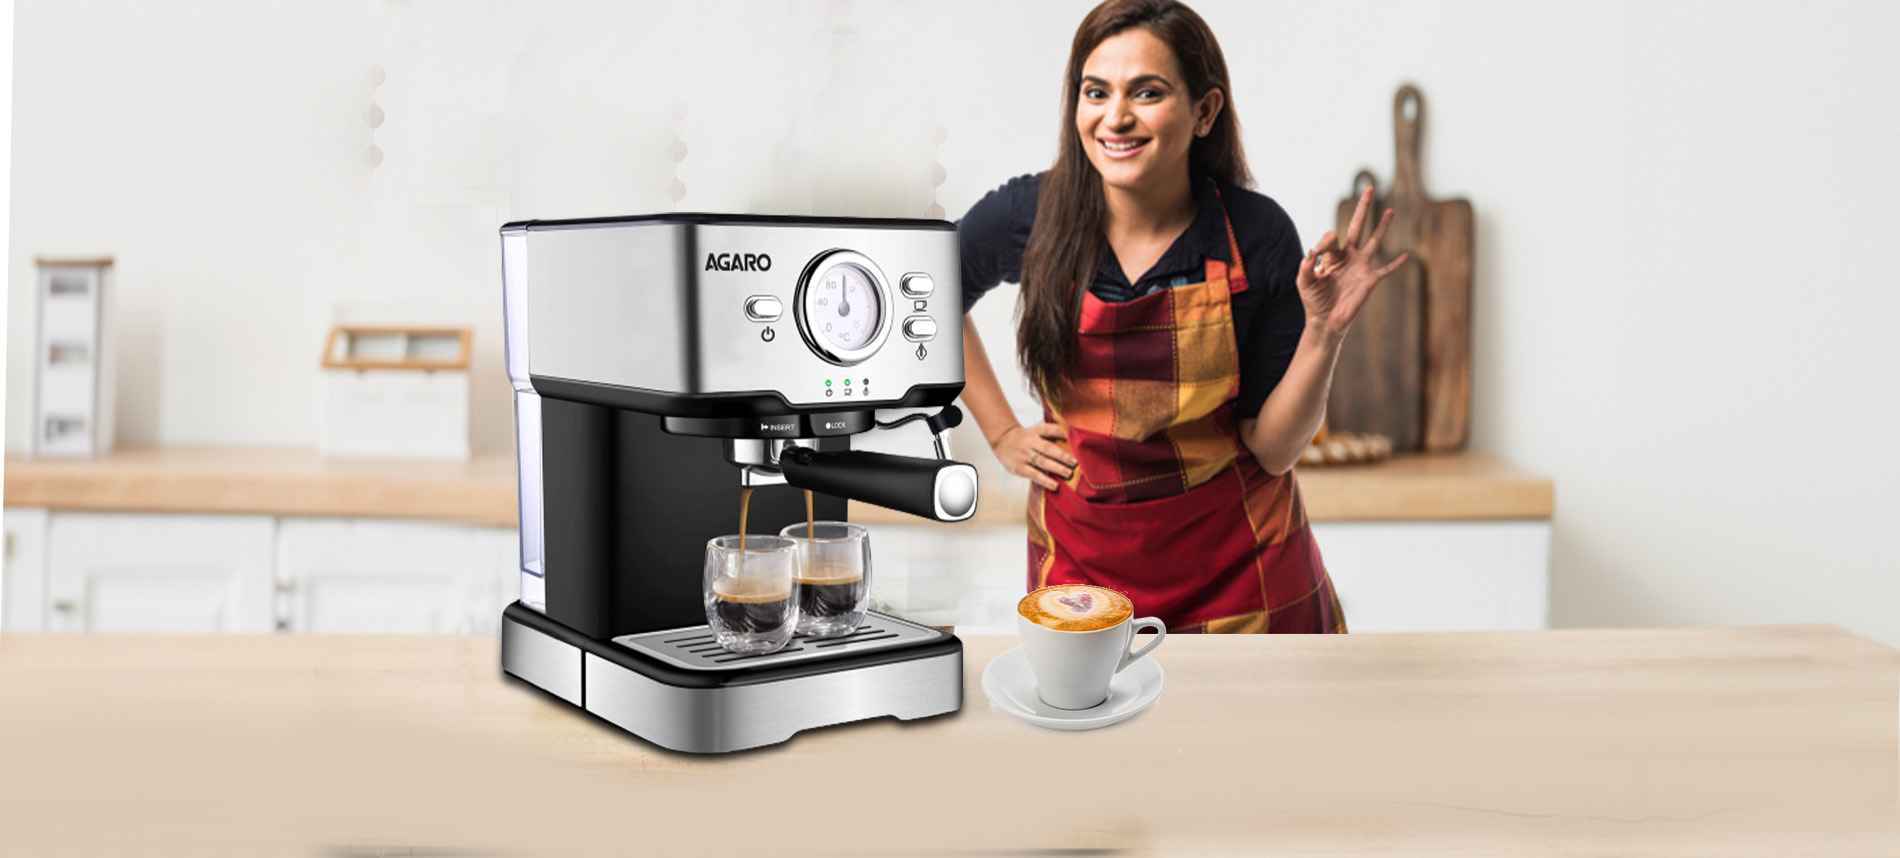 10 Amazing Coffee Machine With Milk Frother for 2023